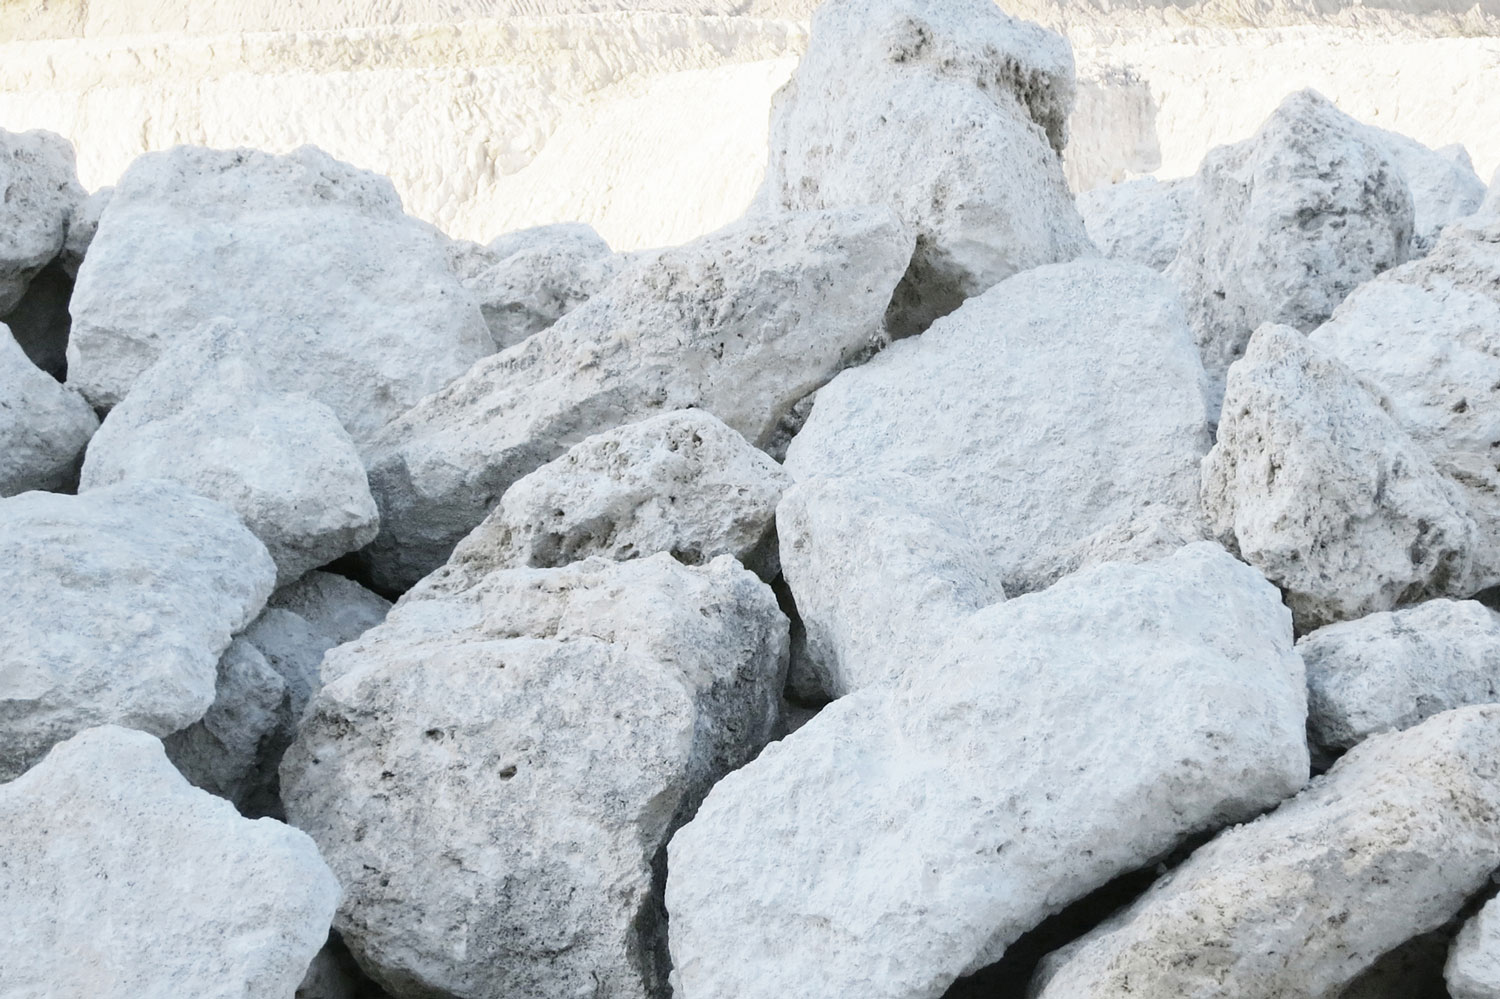 Faxe is a world known manufacturer of natural coral limestone.